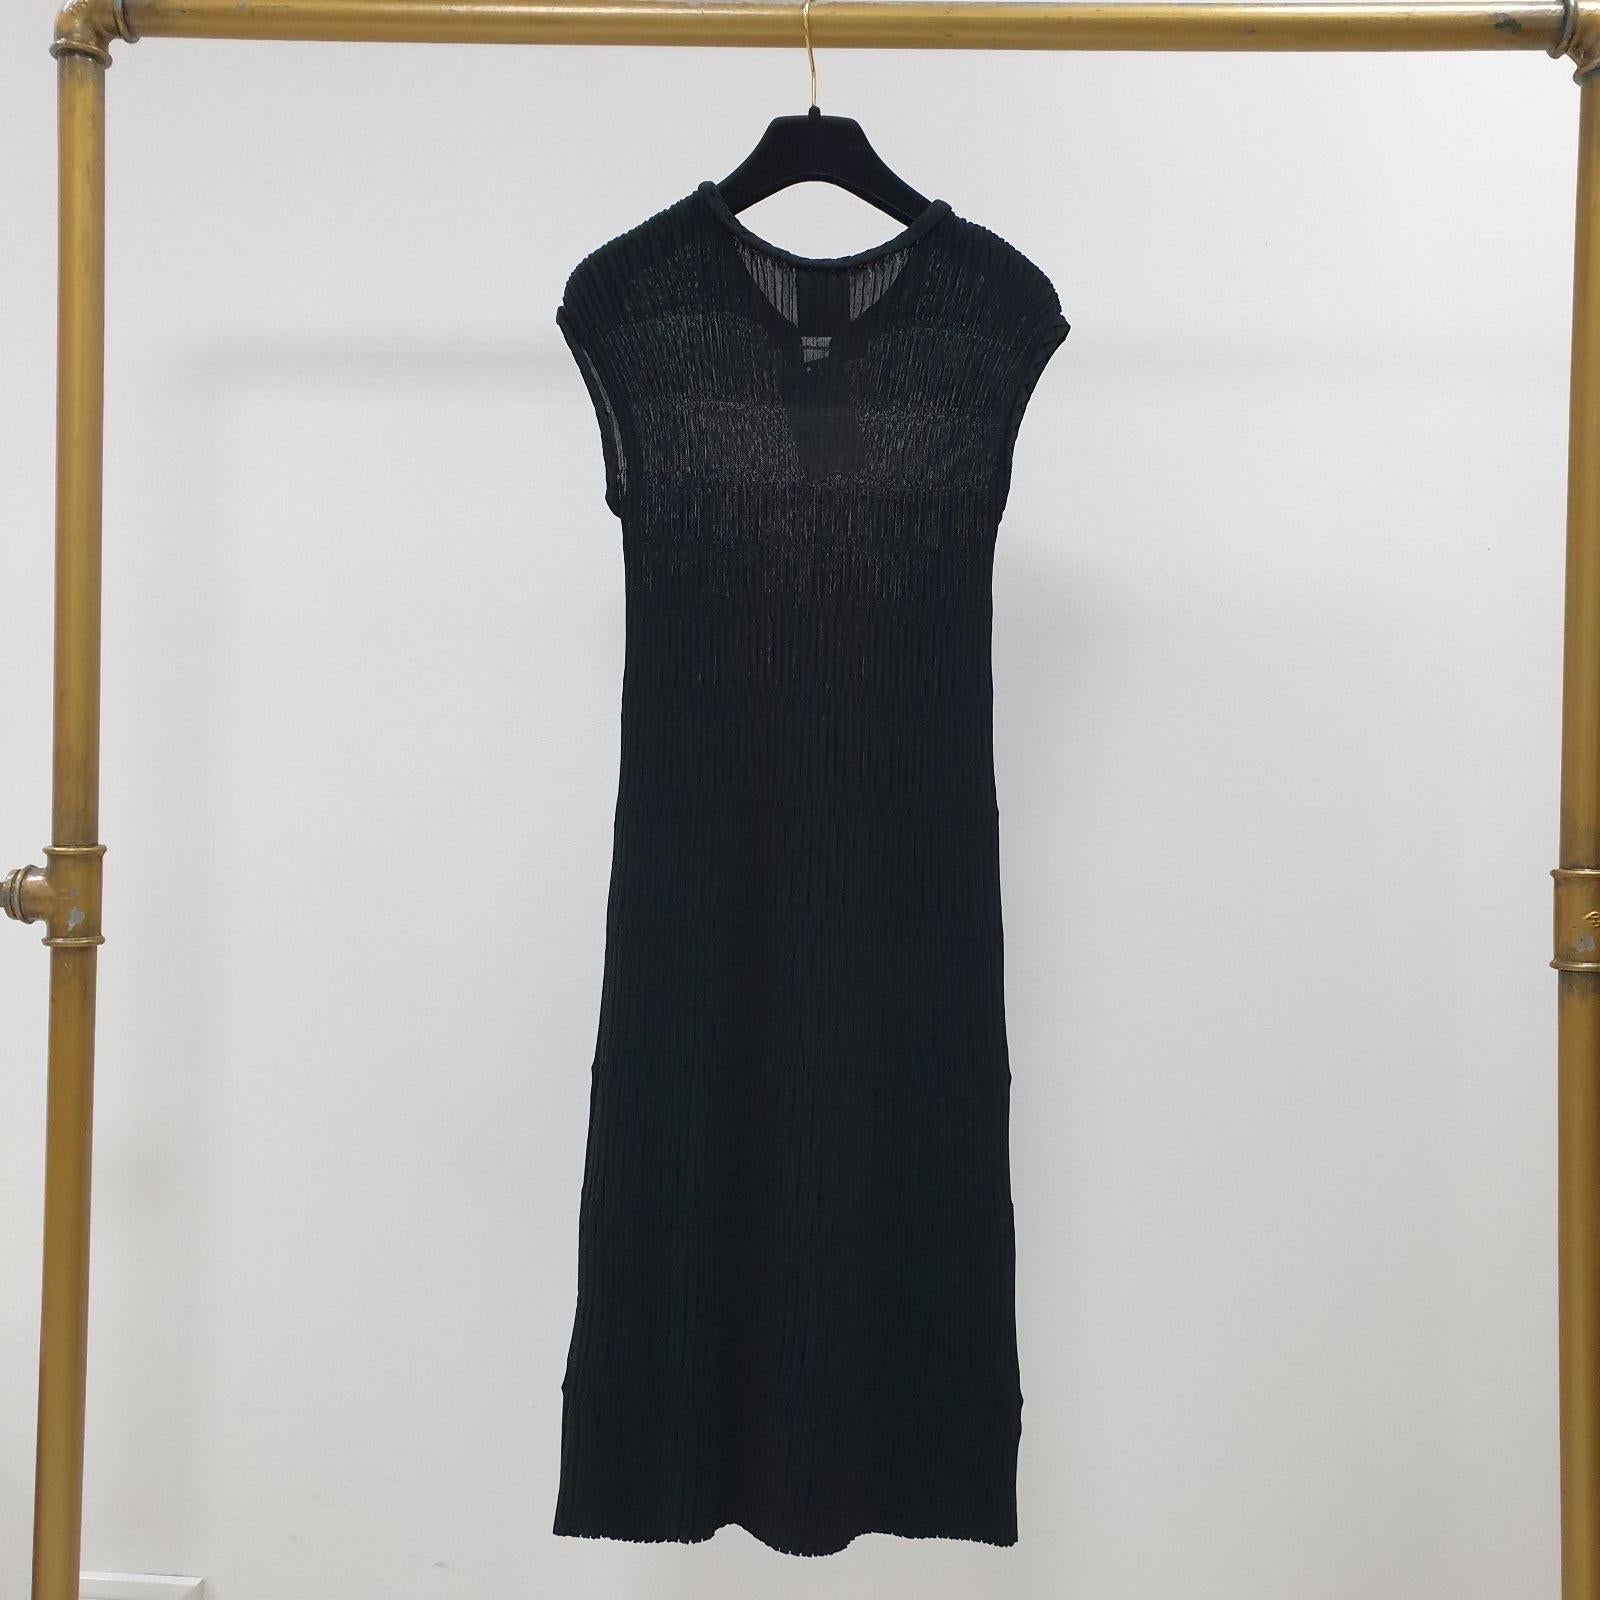 Authentic Chanel minimally divine in a black knit, this dressis a luxurious but practical investment that you can wear season after season.

Beautiful Chanel 2 front buttons around the neckline.

Sz.34
Excellent condition.